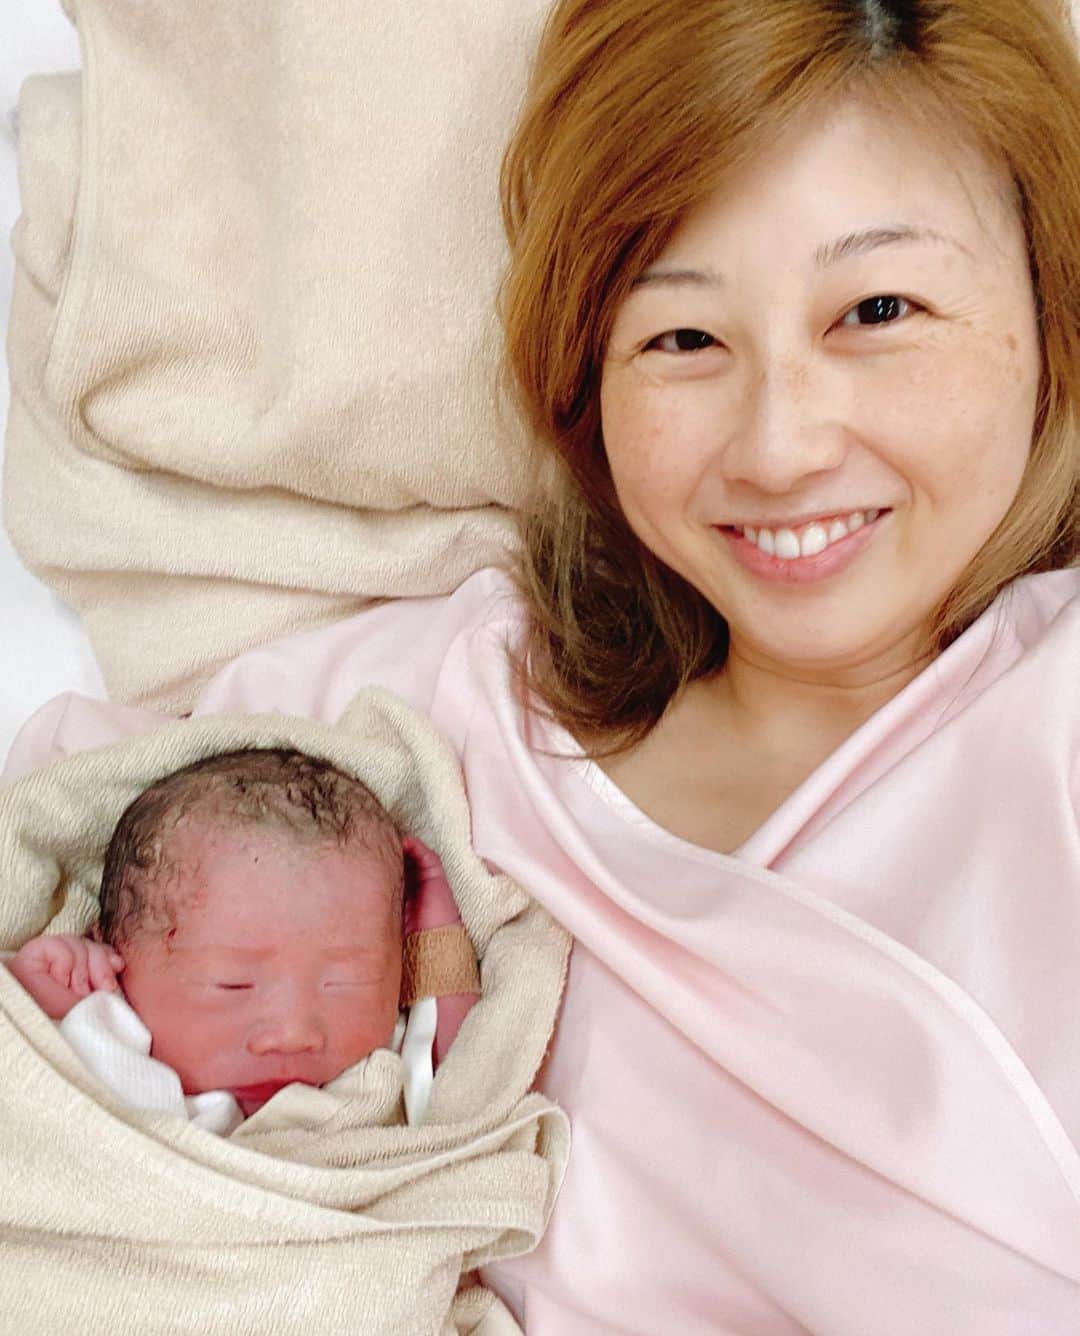 吉田ちかさんのインスタグラム写真 - (吉田ちかInstagram)「👶🏻💕✨Our baby is here✨💕👶🏻  This may come as a bit of a surprise since I was just posting about getting out of the hospital where I’ve been for the last two weeks getting bedrest to prevent preterm labor…  but here he is!!   I entered 37 weeks yesterday and with the baby safe to come out whenever, I was scheduled to go home. But around 3AM I went into labor! And a little past 1PM, I gave birth to a healthy baby boy! It was like he was saying, “Hey, you said I could come out whenever now!”  All in all, we had a very safe delivery, but the labor pains were of course brutal and our baby was in breech position so that made for a unique delivery, and there were definitely moments when I didn’t think I could get through it.   With covid, I couldn’t have osaru-san with me like last time, but the doctors and nurses were extremely supportive and encouraging, and with their help we were  able to safely welcome our baby into the world!  Just two days ago, I was hoping to go home to see Pudding and organize the house a bit, but come to think of it, I probably would’t have gotten much done with the big belly and Pudding would have probably been like “why isn’t the baby born yet?! You have to go back to the hospital again?! “  So even though I won’t get to see Pudding for a little while longer, at least now when I go home next week I’ll have her little brother with me💕   I think it all worked out in the end. Looks like our little boy was thinking about his big sister even before he was born!!   前回の投稿では退院の話をしていたので、突然すぎてびっくりかもですが😅 昨日元気な男の子が産まれました！  実は、昨日で妊娠37週に入り、赤ちゃんがいつ産まれてもいい時期になったので一旦退院する予定だったのですが、夜中の3時にまさかの陣痛‼️そして、13時過ぎに元気な男の子が産まれました❤️  安産ではありましたが、陣痛の痛みはもちろん辛くて、逆子の経膣分娩という比較的珍しいお産だったということもあり、後半は心が折れそうになった瞬間もありました😭   コロナ禍で前回のようにおさるさんに立ち会ってもらうこともできず、少し不安もありましたが、優しい先生たちと助産師さんさんたちがずっと支えてくれて、無事に産むことができました。  一昨日までは、一旦退院してプリンに会って、家を少し整えたいと思っていましたが😅 実際帰ったところで大きなお腹では何もできなかっただろうし、プリンも「なんでまだ産まれてないの？？また病院に行くの？？」ってなったかと思いますw   プリンにはもう少し我慢してもらうことになりますが、来週会う時にはbabyと一緒にお家に帰れる💕その方が結果良かったのかも！既にお姉ちゃん想いのベビーです👶🏻✨  皆さん、沢山の応援メッセージありがとうございました❤️本日、午後から母子同室なにるので、楽しみです😆」10月9日 11時52分 - bilingirl_chika